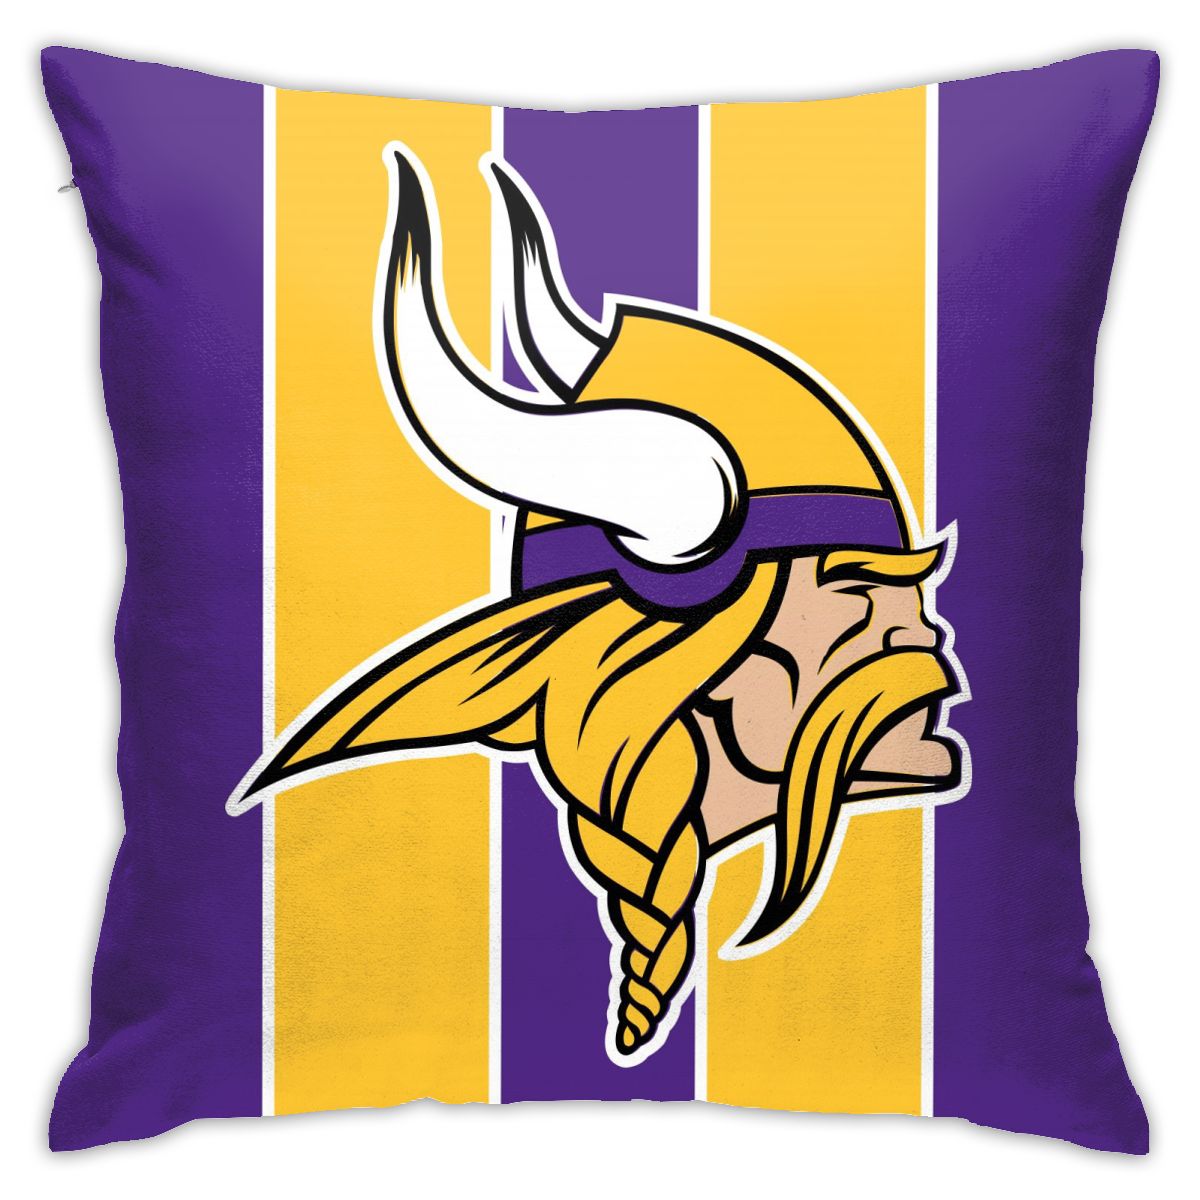 Custom Decorative Pillow 18inch*18inch 01- Purple Pillowcase Personalized Throw Pillow Covers